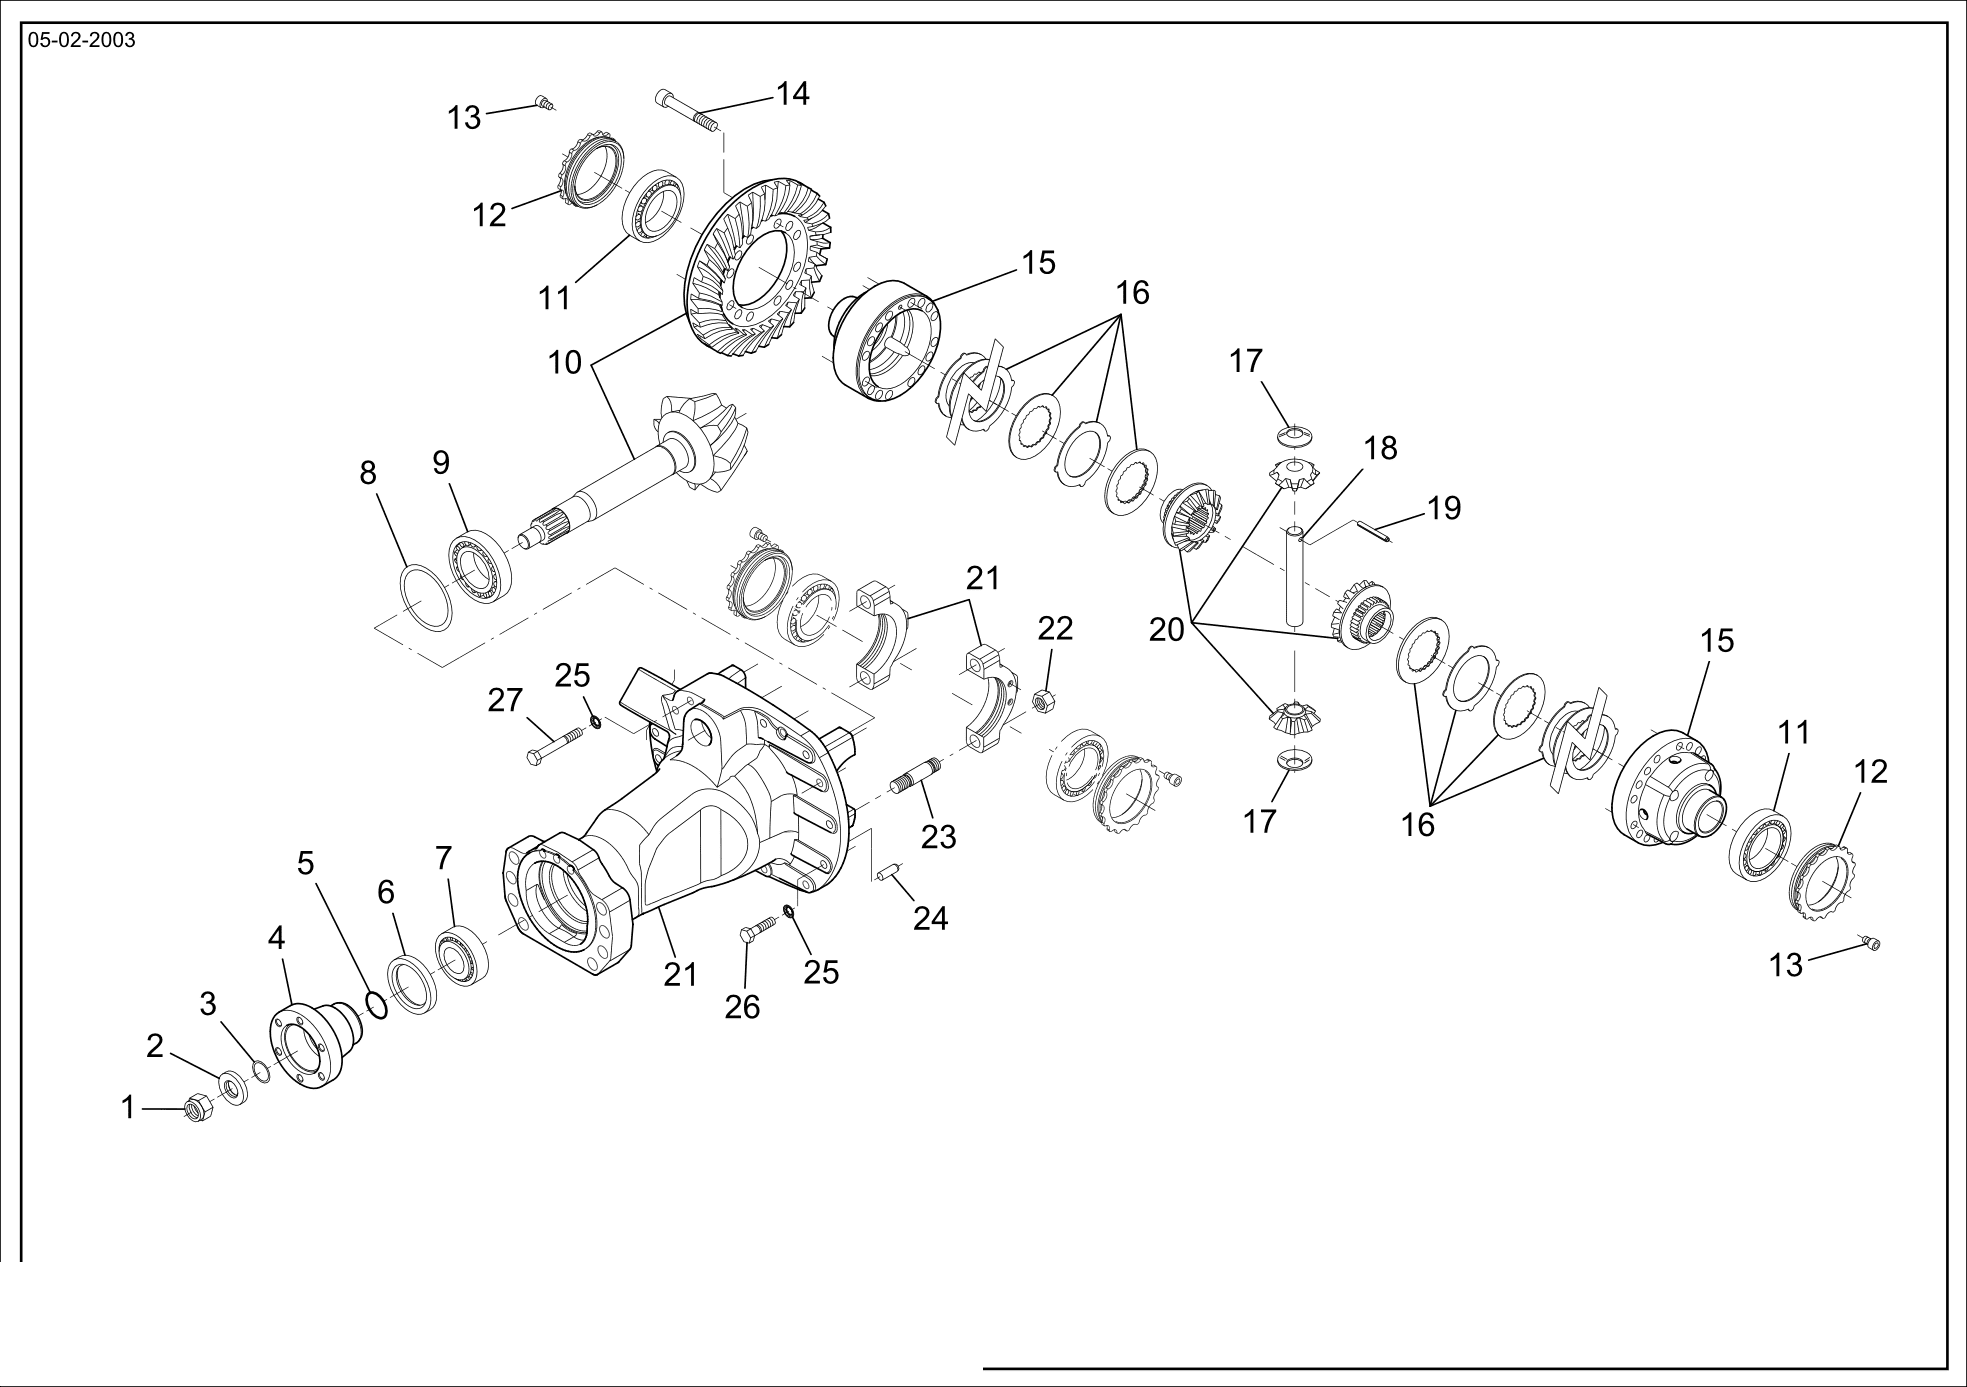 drawing for GHH 1202-0041 - BOLT (figure 4)